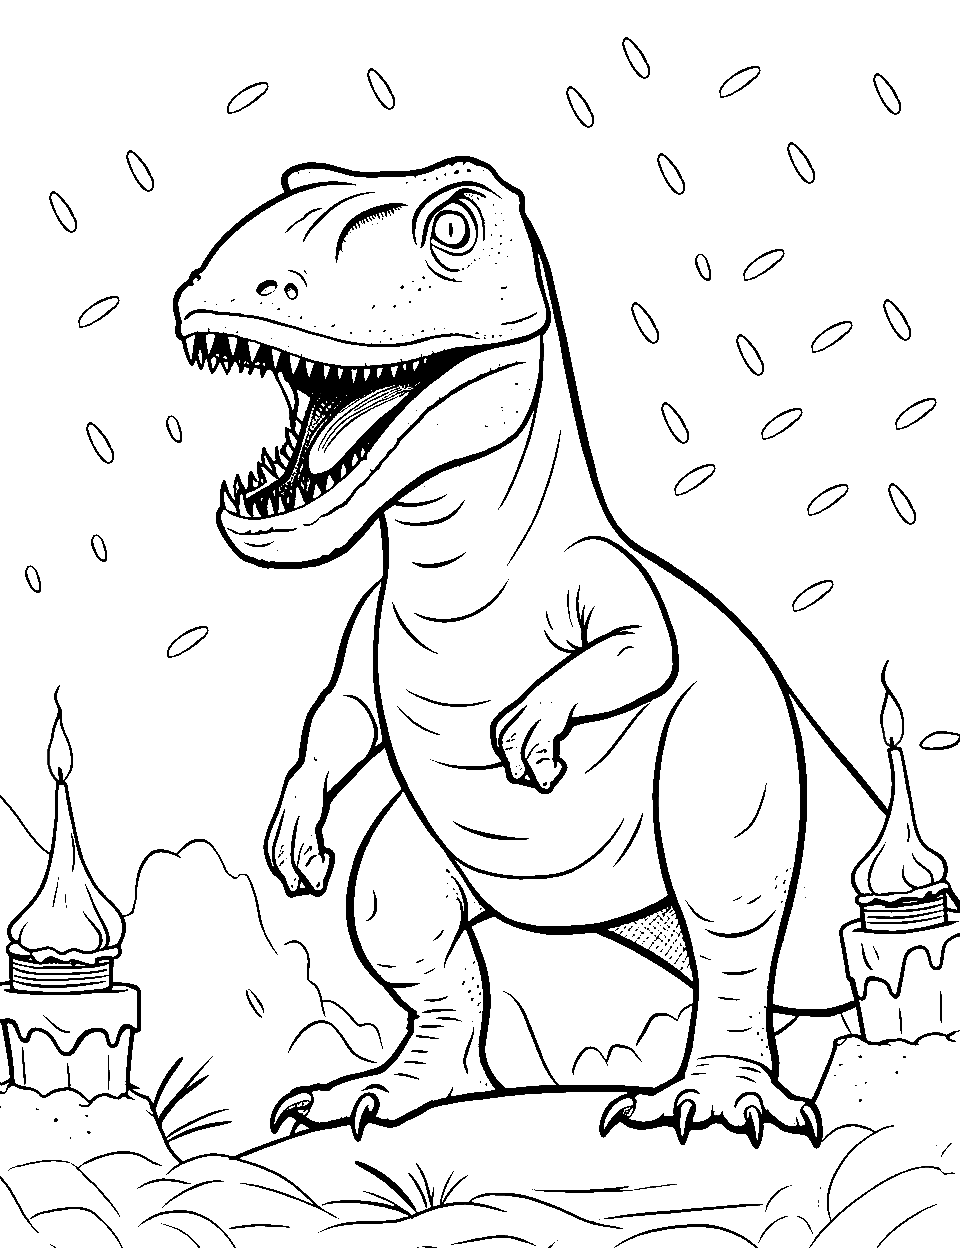 T Rex in a Fairyland T-rex Coloring Page - A T-Rex in a fantasy-themed fairyland.